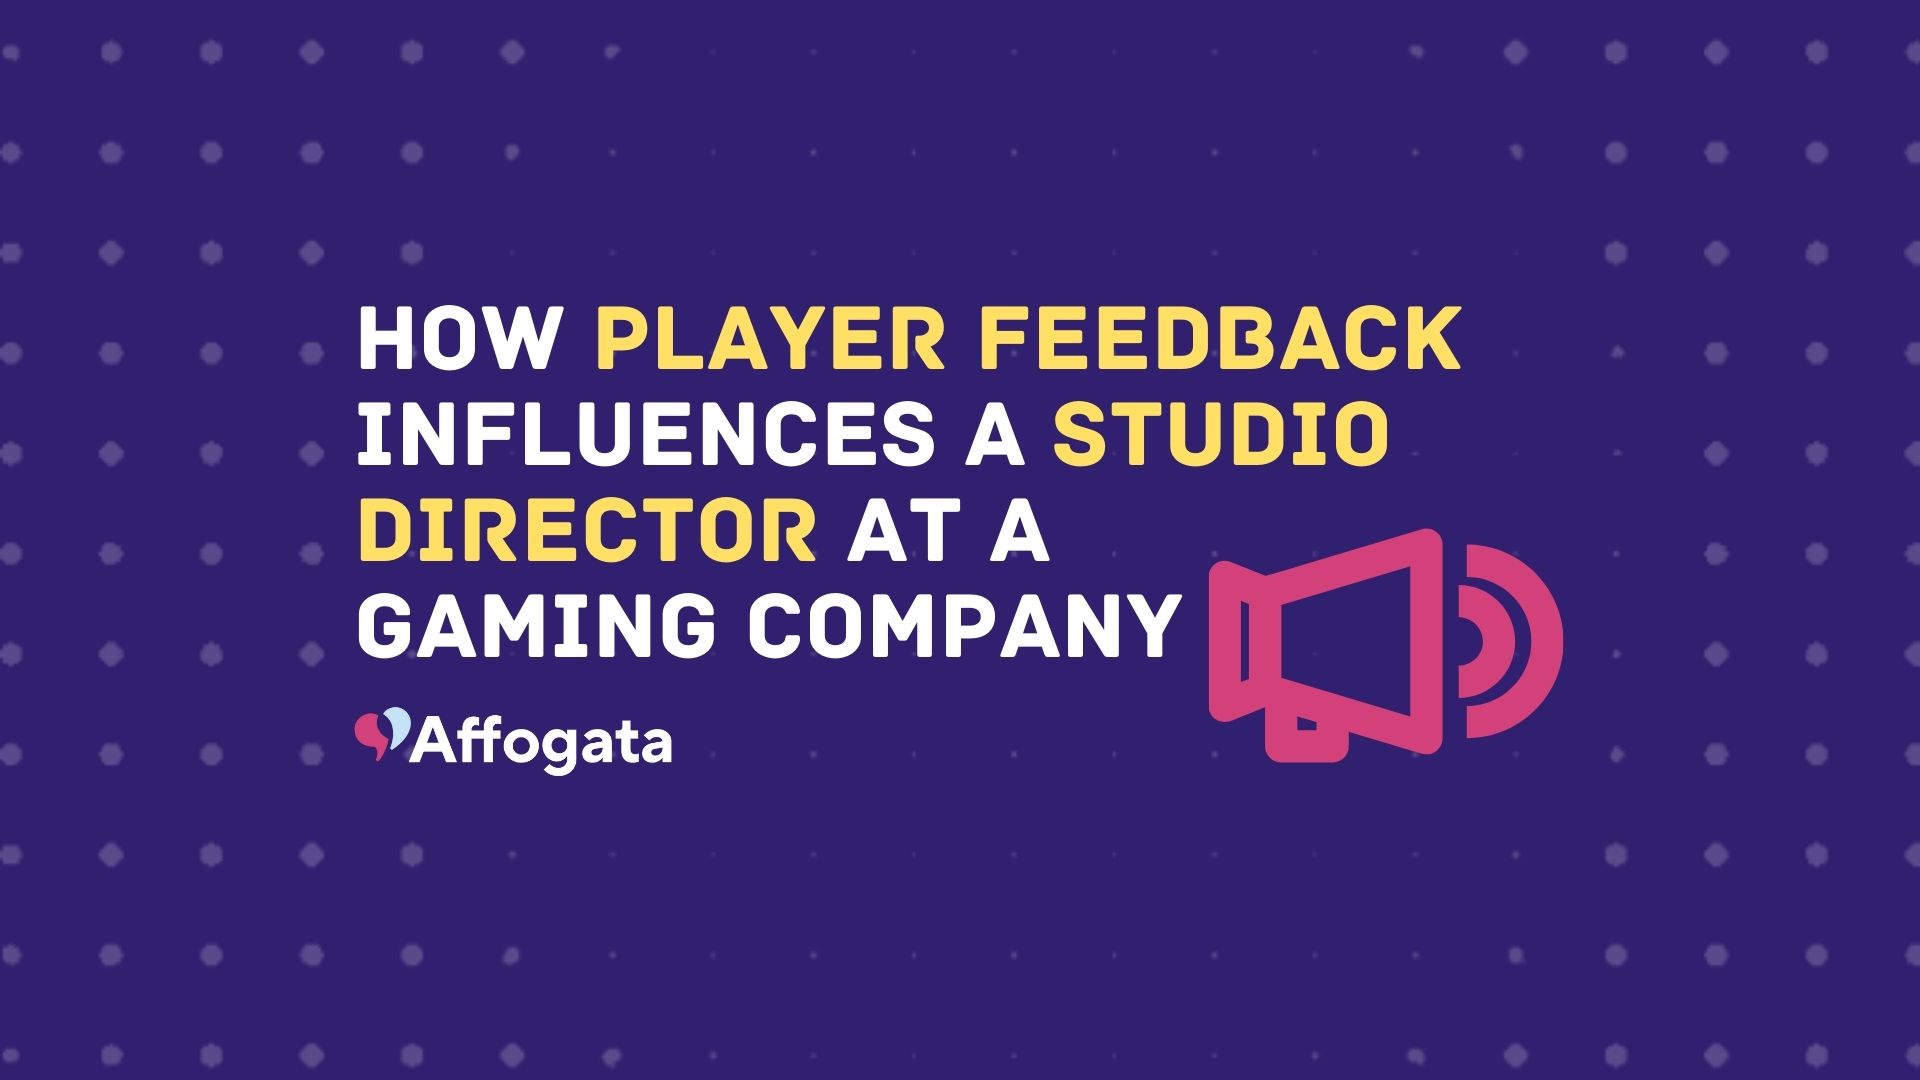 How player feedback influences a Studio Director at a gaming company